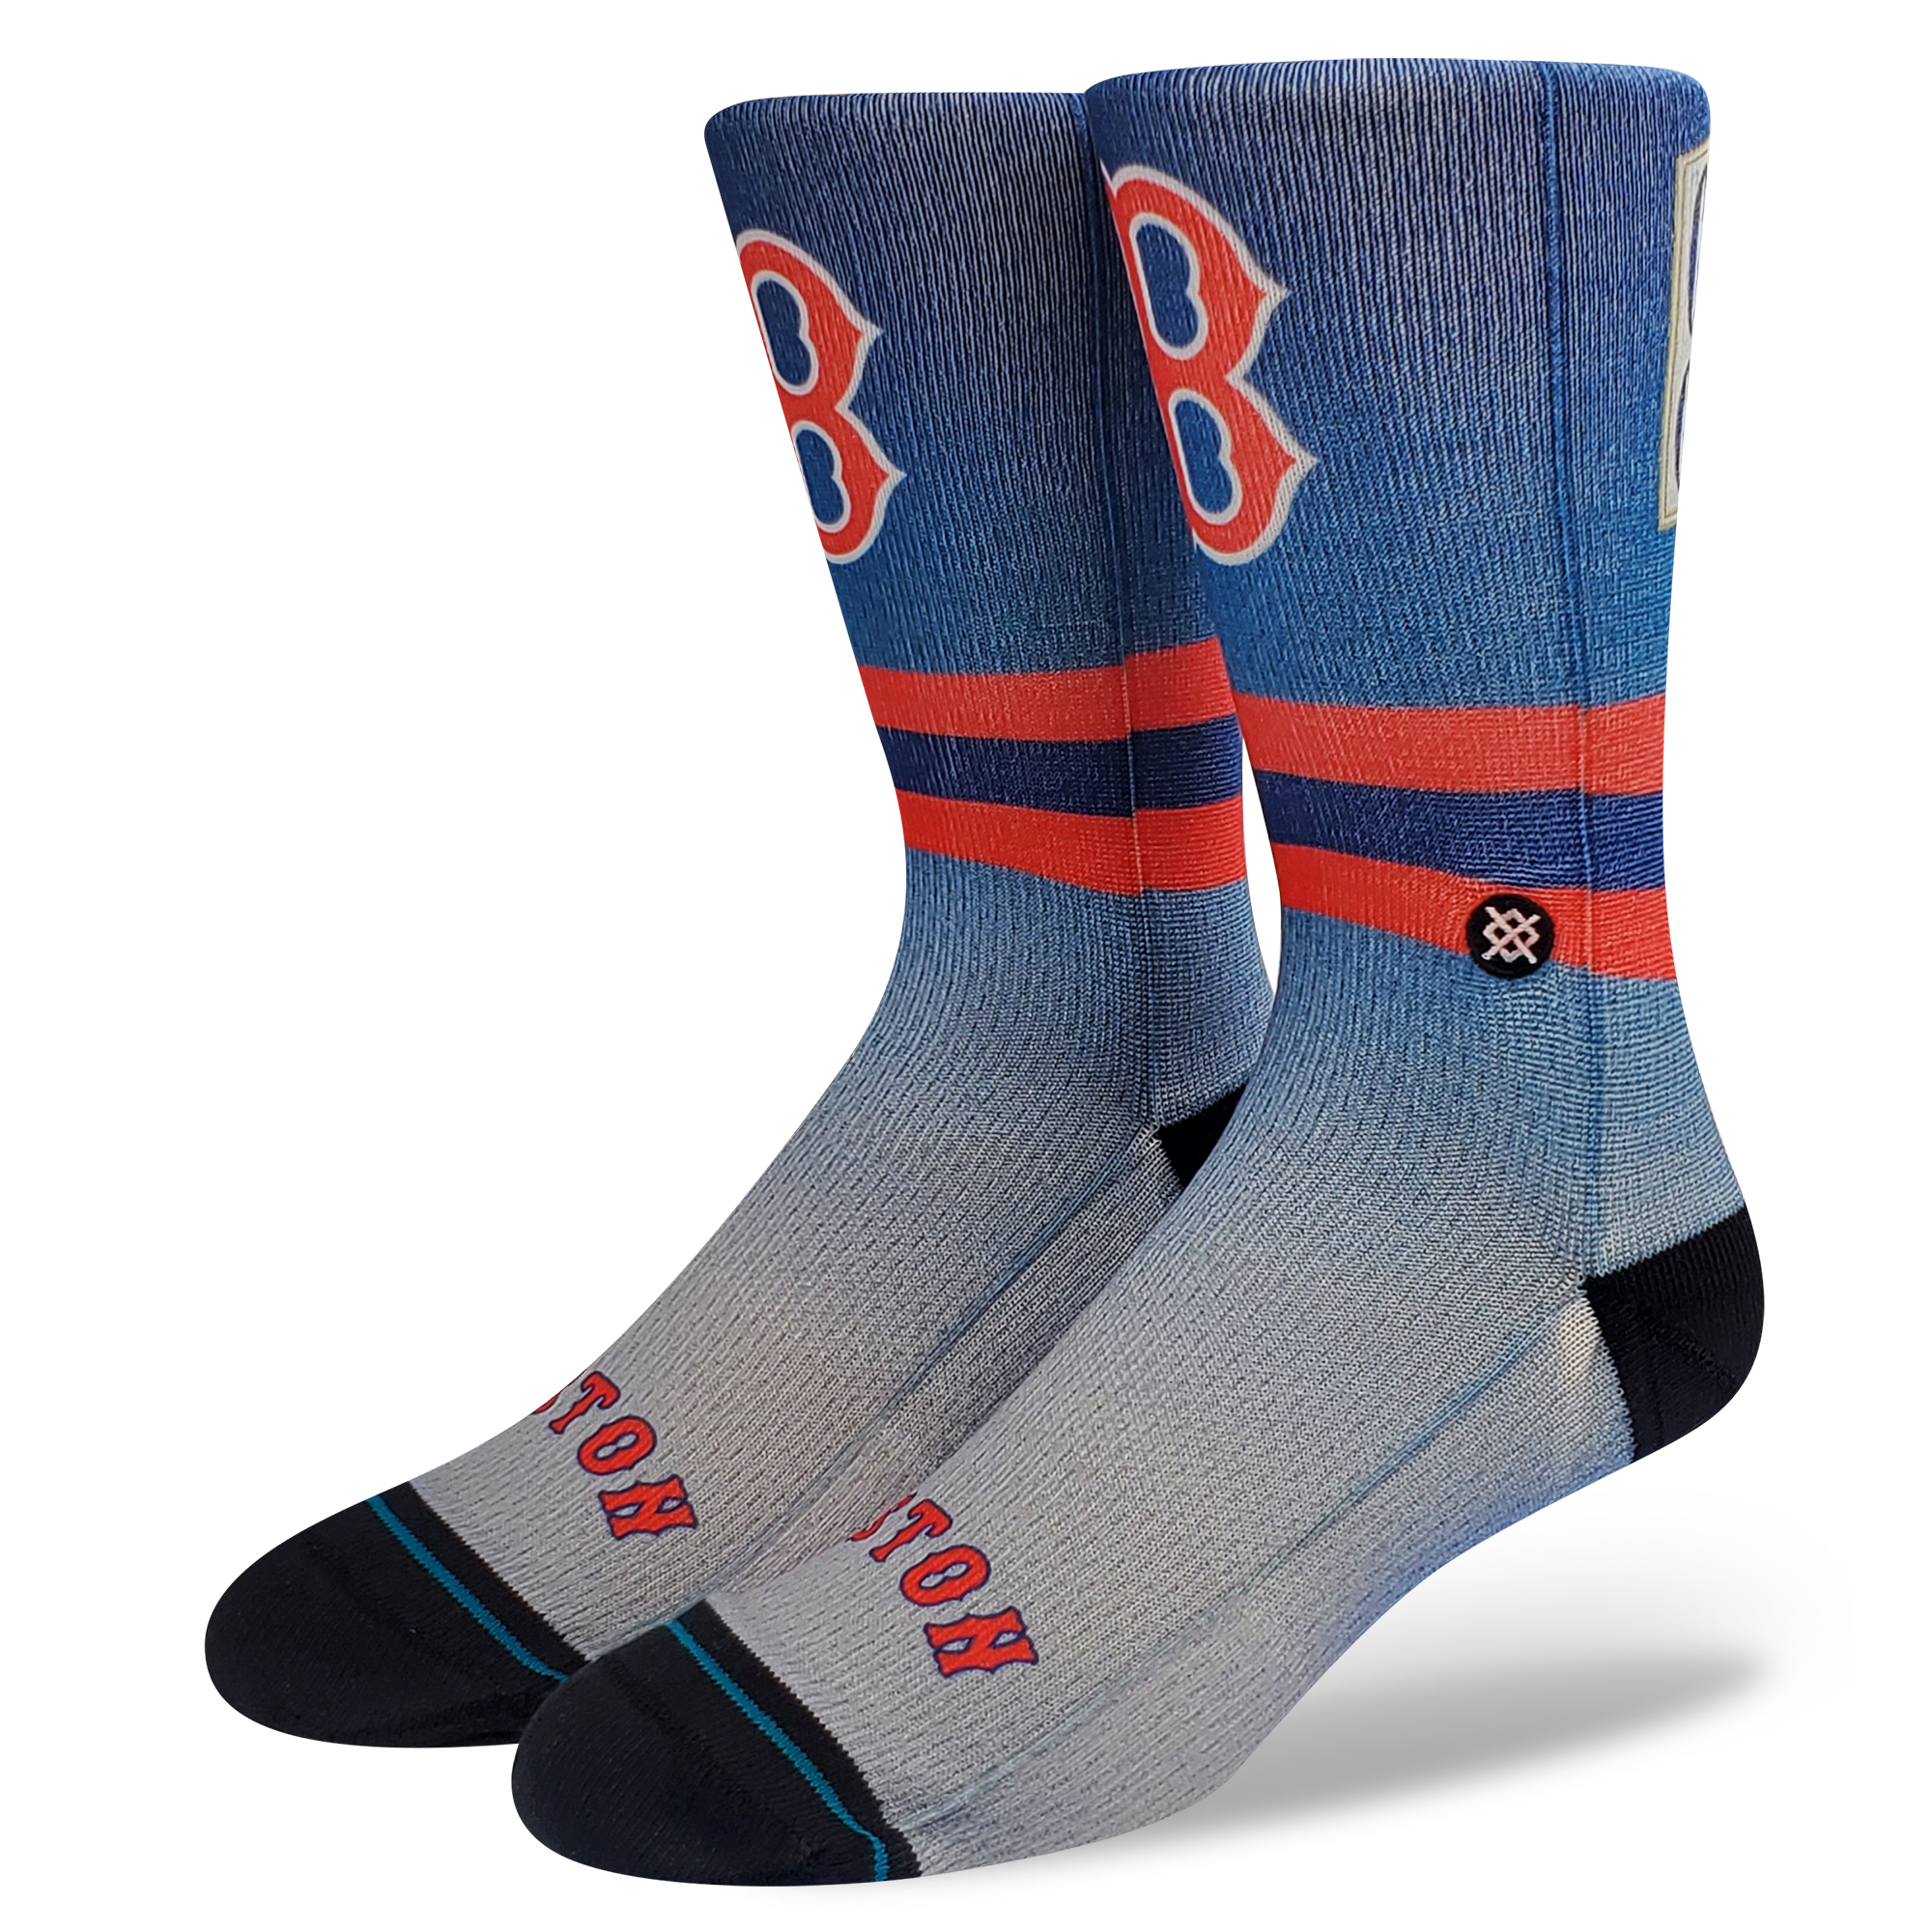 MLB X Stance Cooperstown Collection Poly Crew Socks | Stance